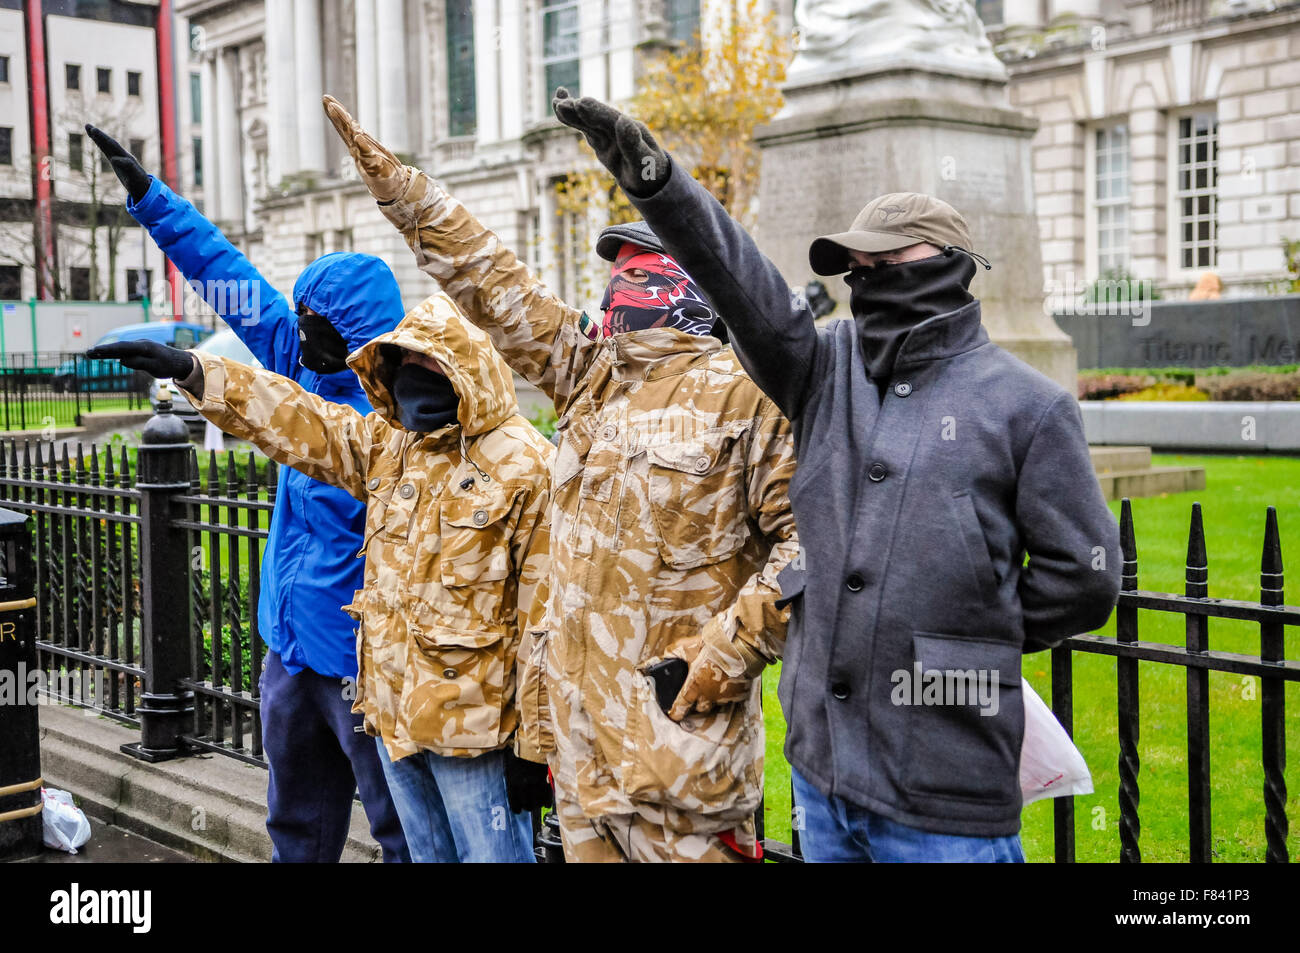 Belfast, Northern Ireland. 05 Dec 2015 - A small group of neo-nazis using the name "Waffen SS West Belfast Shankill Skinheads" protest at Belfast City Hall against Muslim refugees from Syria and elsewhere. In a statement they said "We are skinheads till the day we die, and will always fight for our Britishness. W.P.W.W. [White Pride World Wide]". A representative claimed refugees are not welcome in Belfast. "There are enough problems in our own country over the past years. We don't want them [refugees]. This isn't just from me, it's from everybody I know. Credit:  Stephen Barnes/Alamy Live New Stock Photo